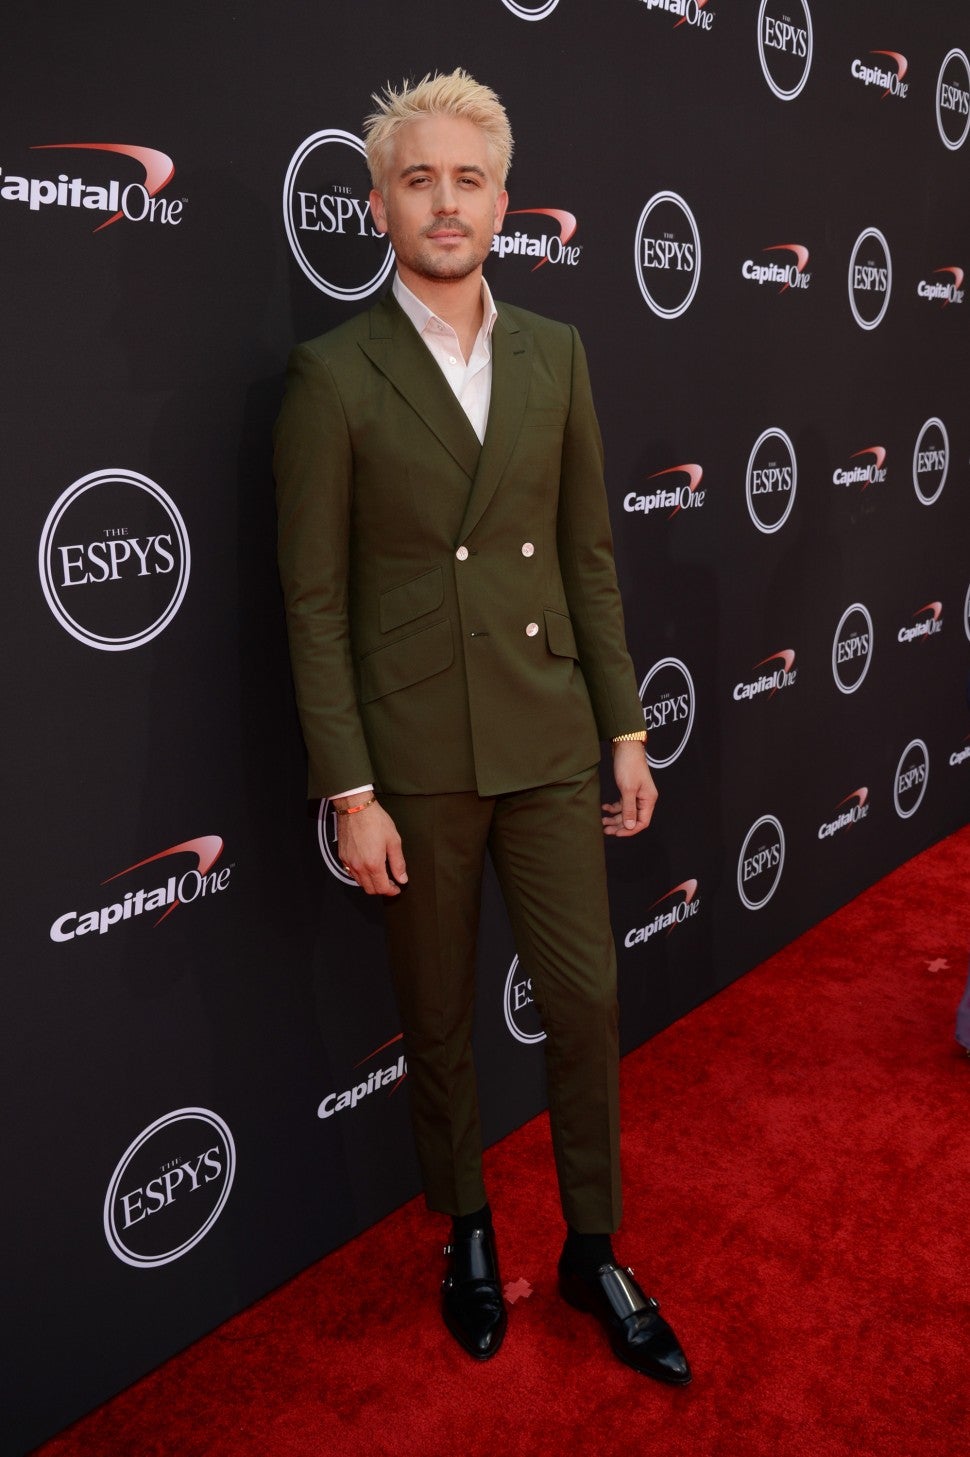 g-eazy_gettyimages-1001447628.jpg